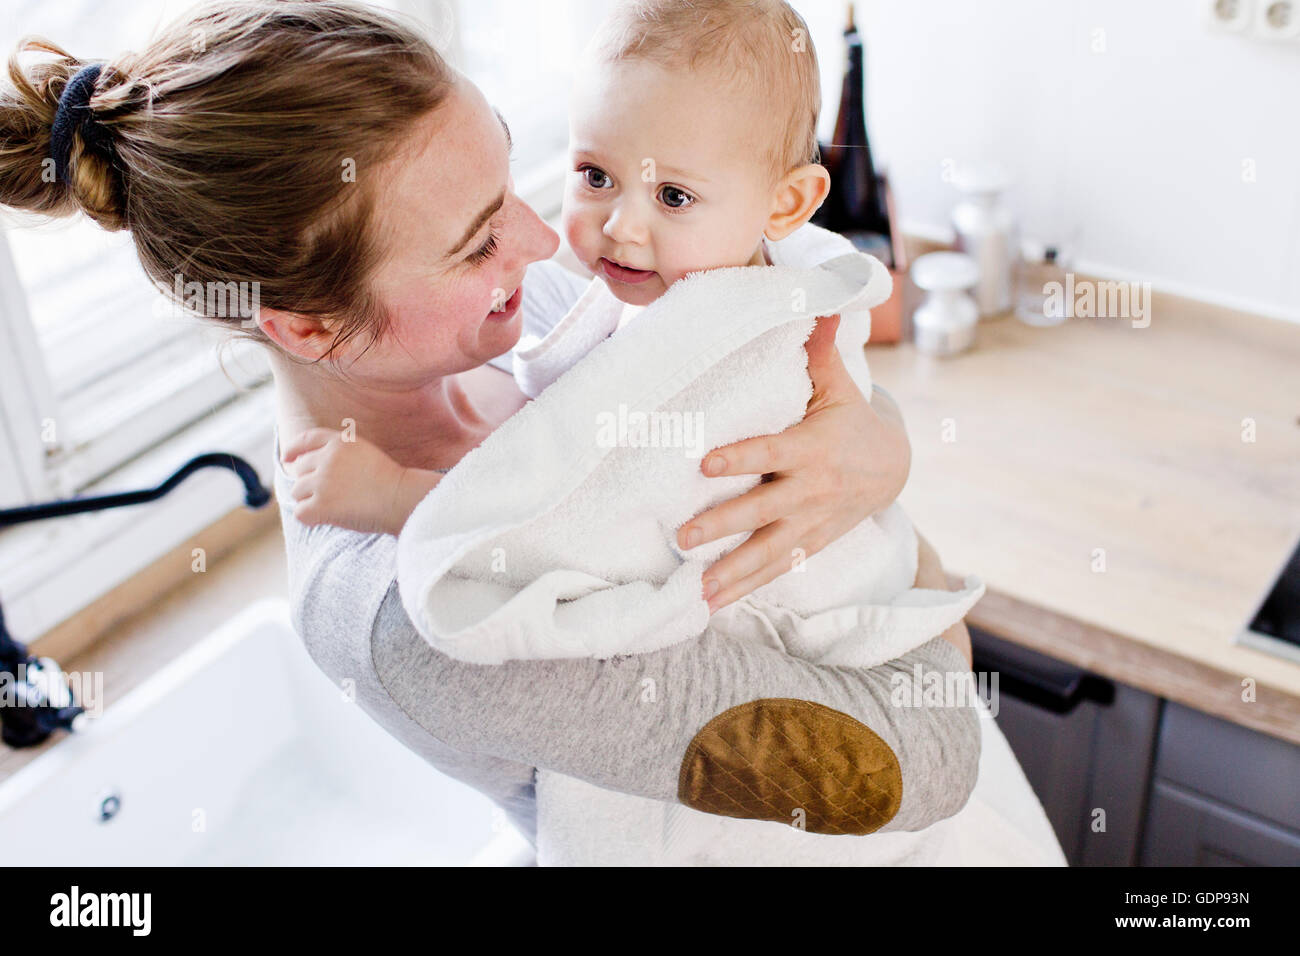 Mother carrying baby son wrapped in towel Stock Photo